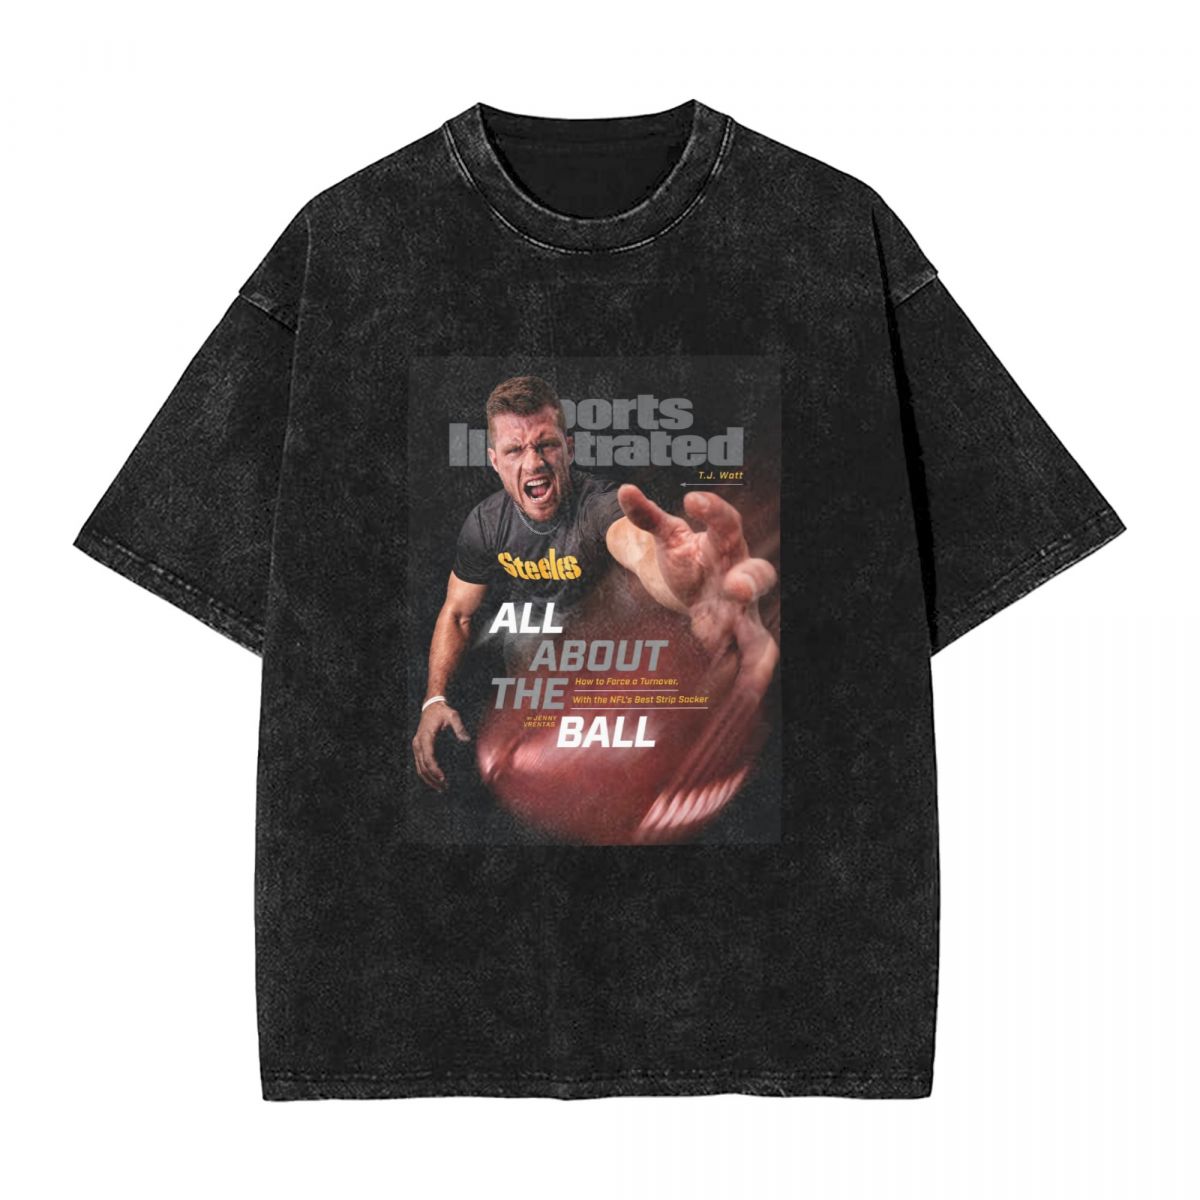 Pittsburgh Steelers T.J. Watt All About The Ball Washed Oversized Vintage Men's T-Shirt